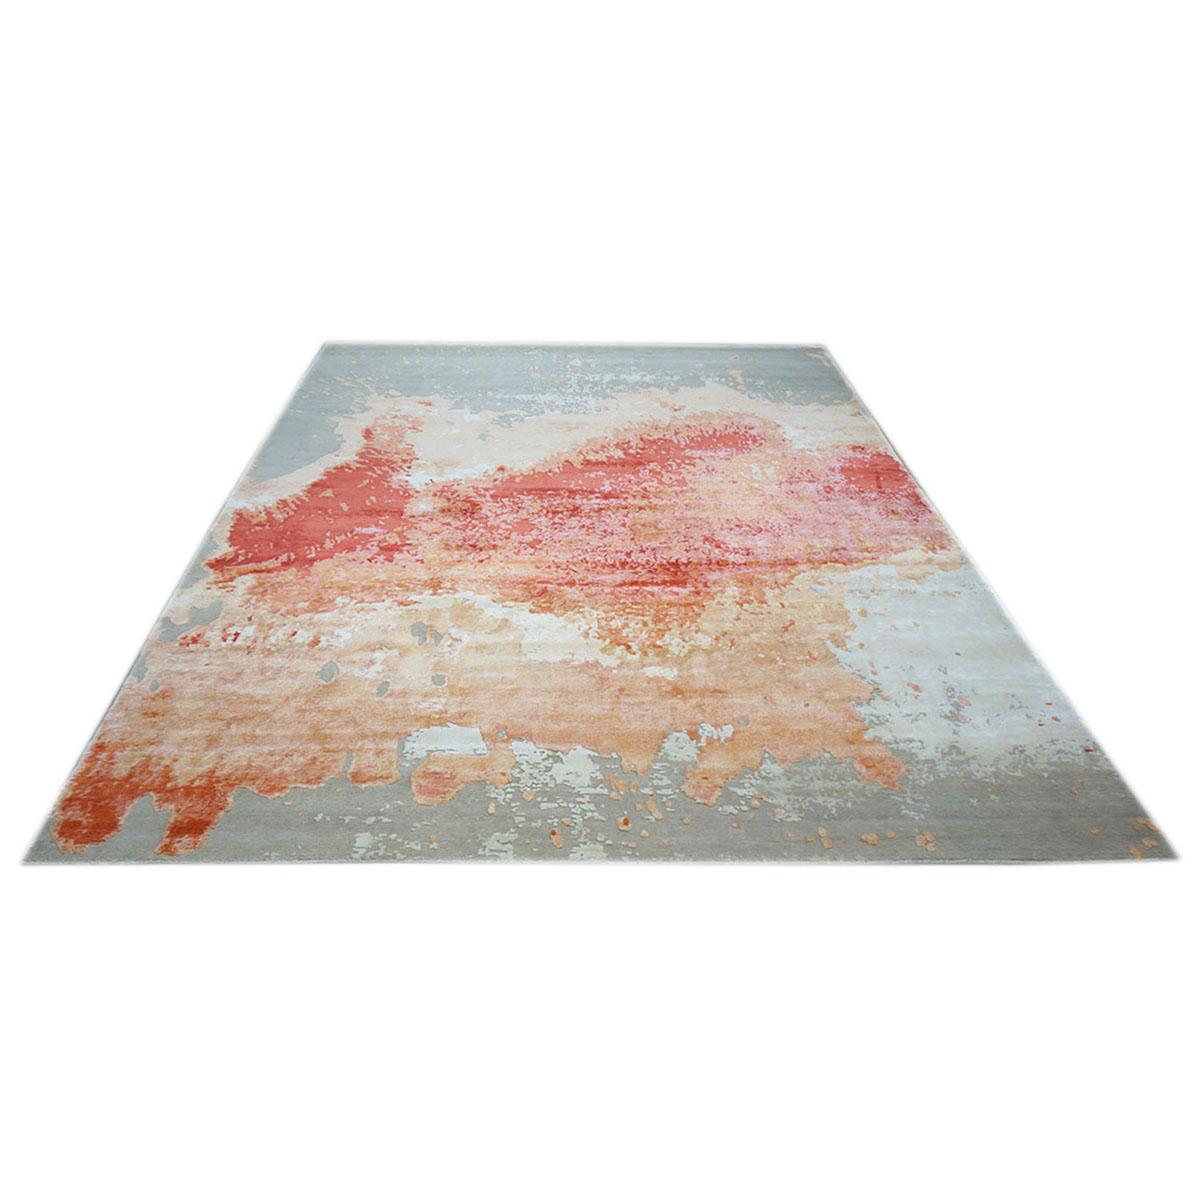 Ashly fine rugs presents a New Modern inspired wool & silk 9x12 grey, orange, & red handmade area rug with lustrous shiny fibers and a thick durable pile. This gorgeous collection has been designed by our in-house designer and handmade by the